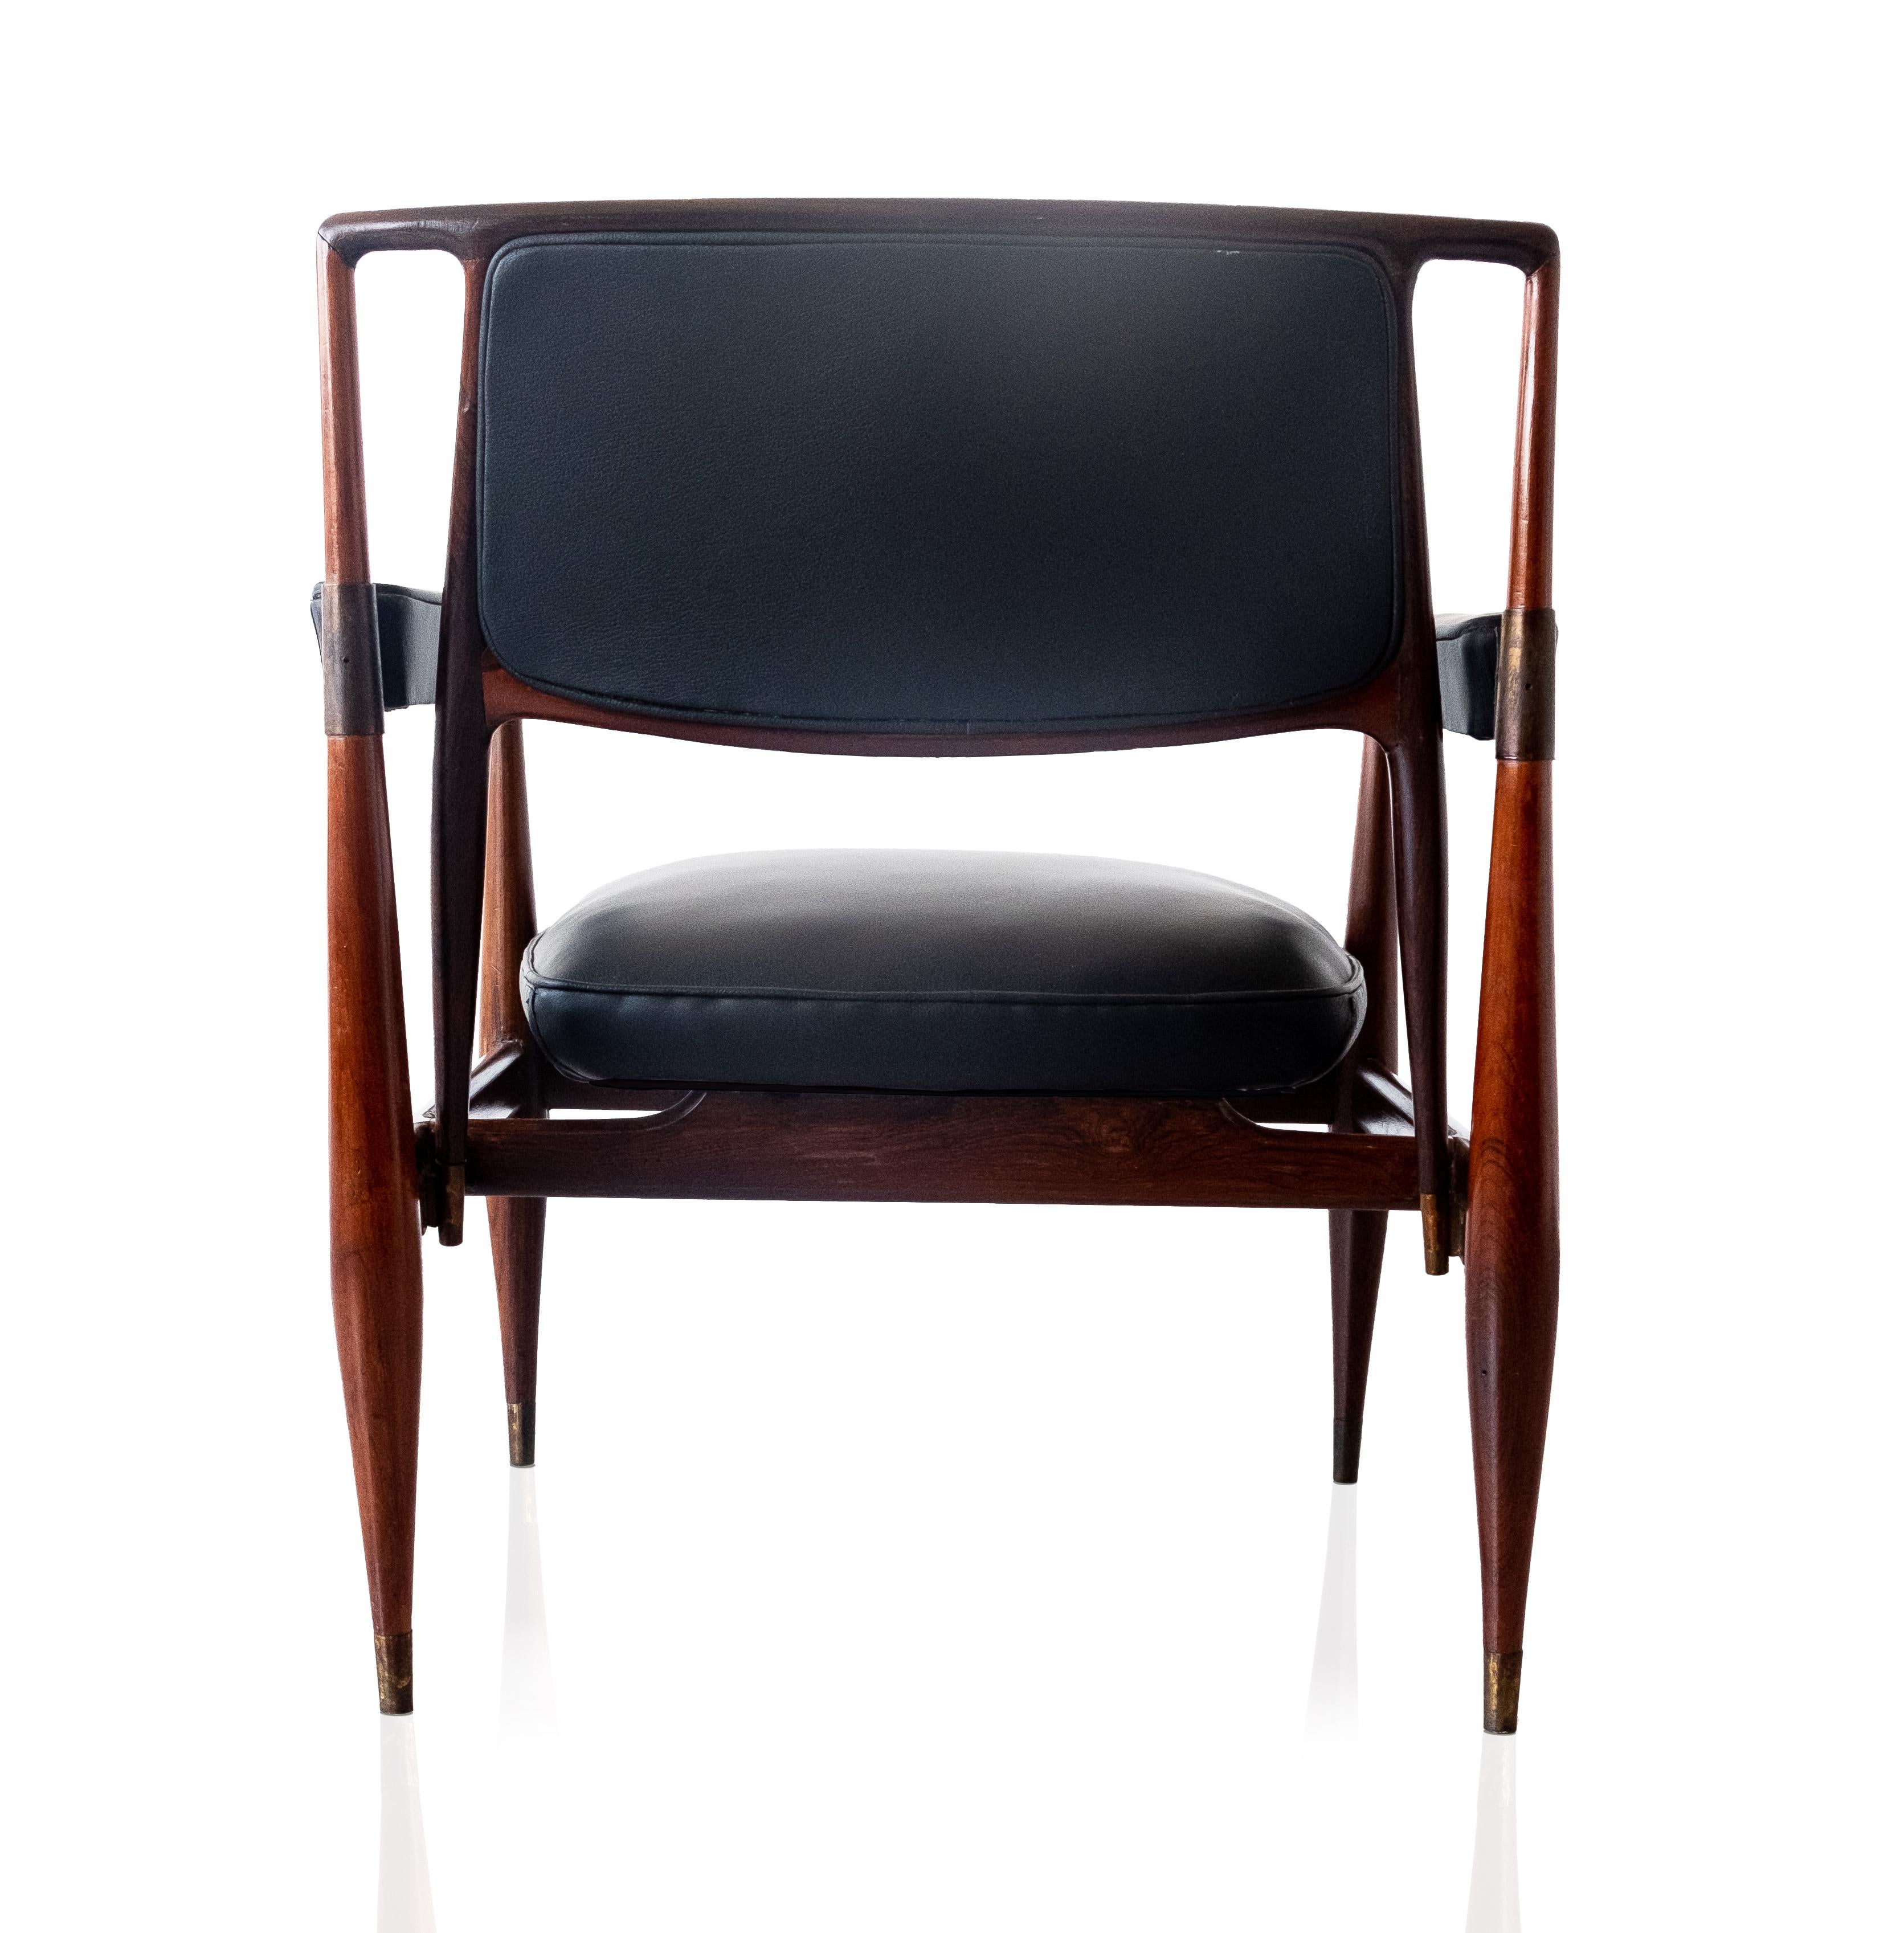 Brazilian Solid Wood rare Armchair by Moveis Ambiente, Brazil, 1960s For Sale